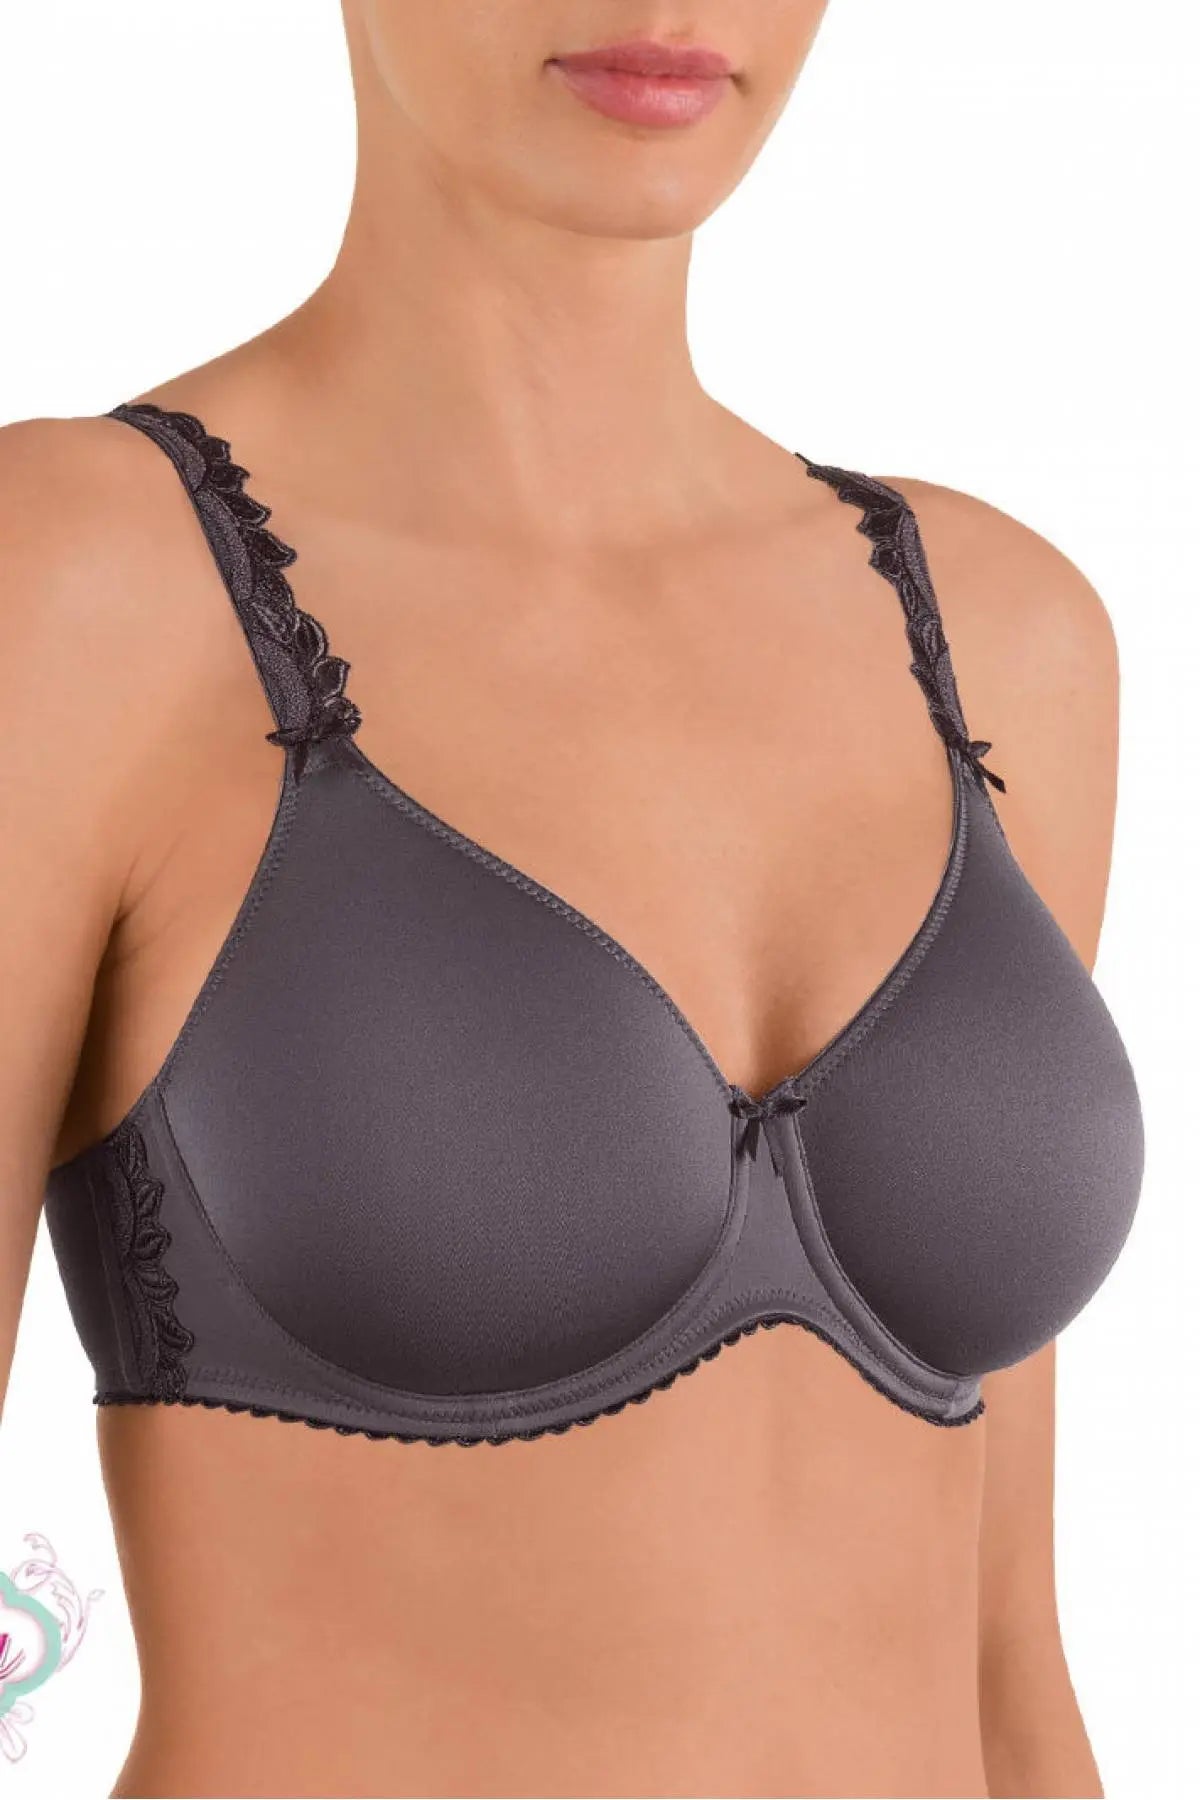 Felina Rhapsody Underwire Bra 048 VANILLA buy for the best price CAD$  142.00 - Canada and U.S. delivery – Bralissimo